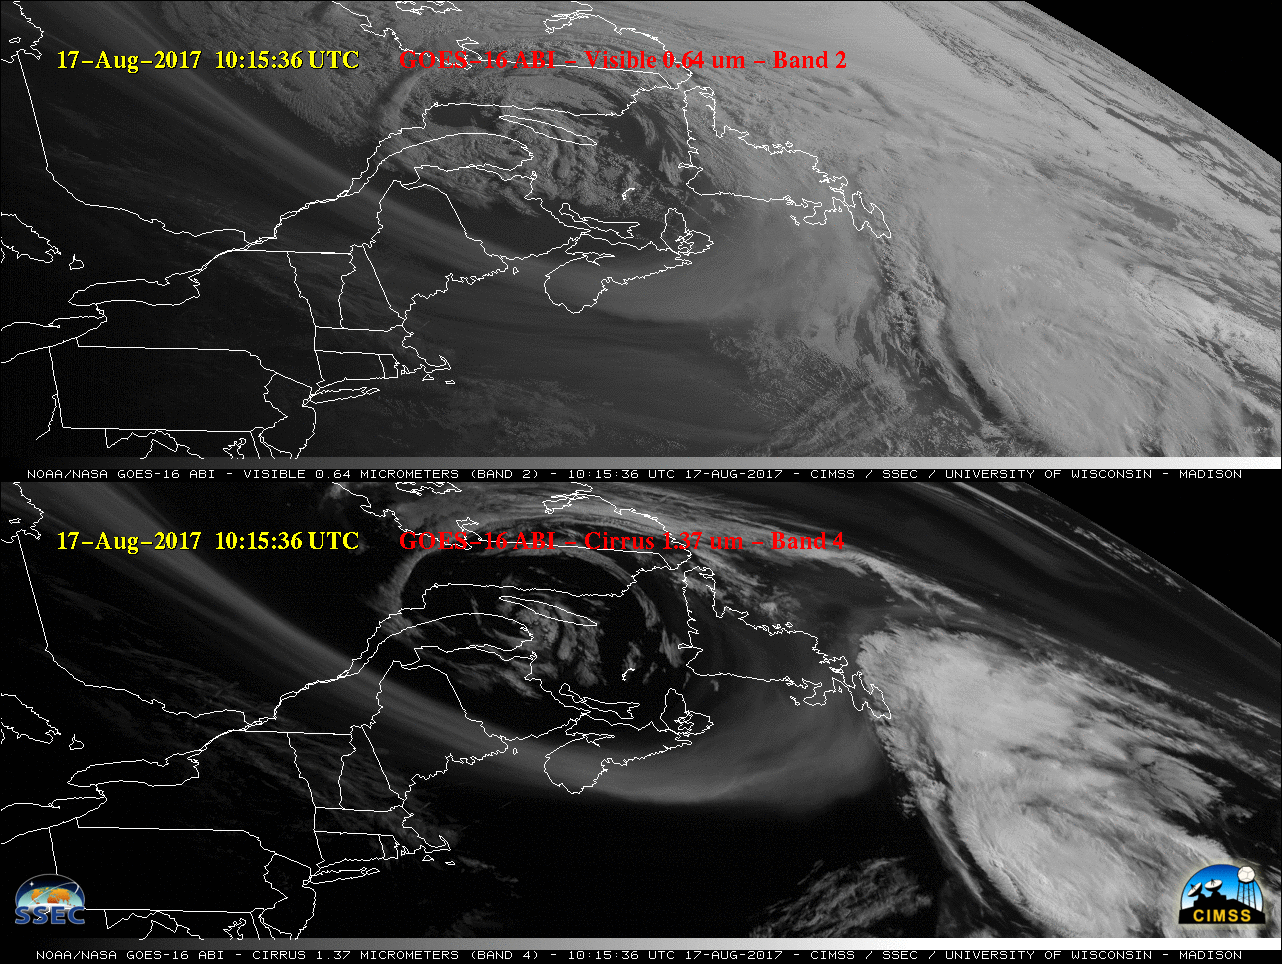 GOES-16 Visible (0.64 µm, top) and Cirrus (1.37 µm, bottom) images [click to play MP4 animation]